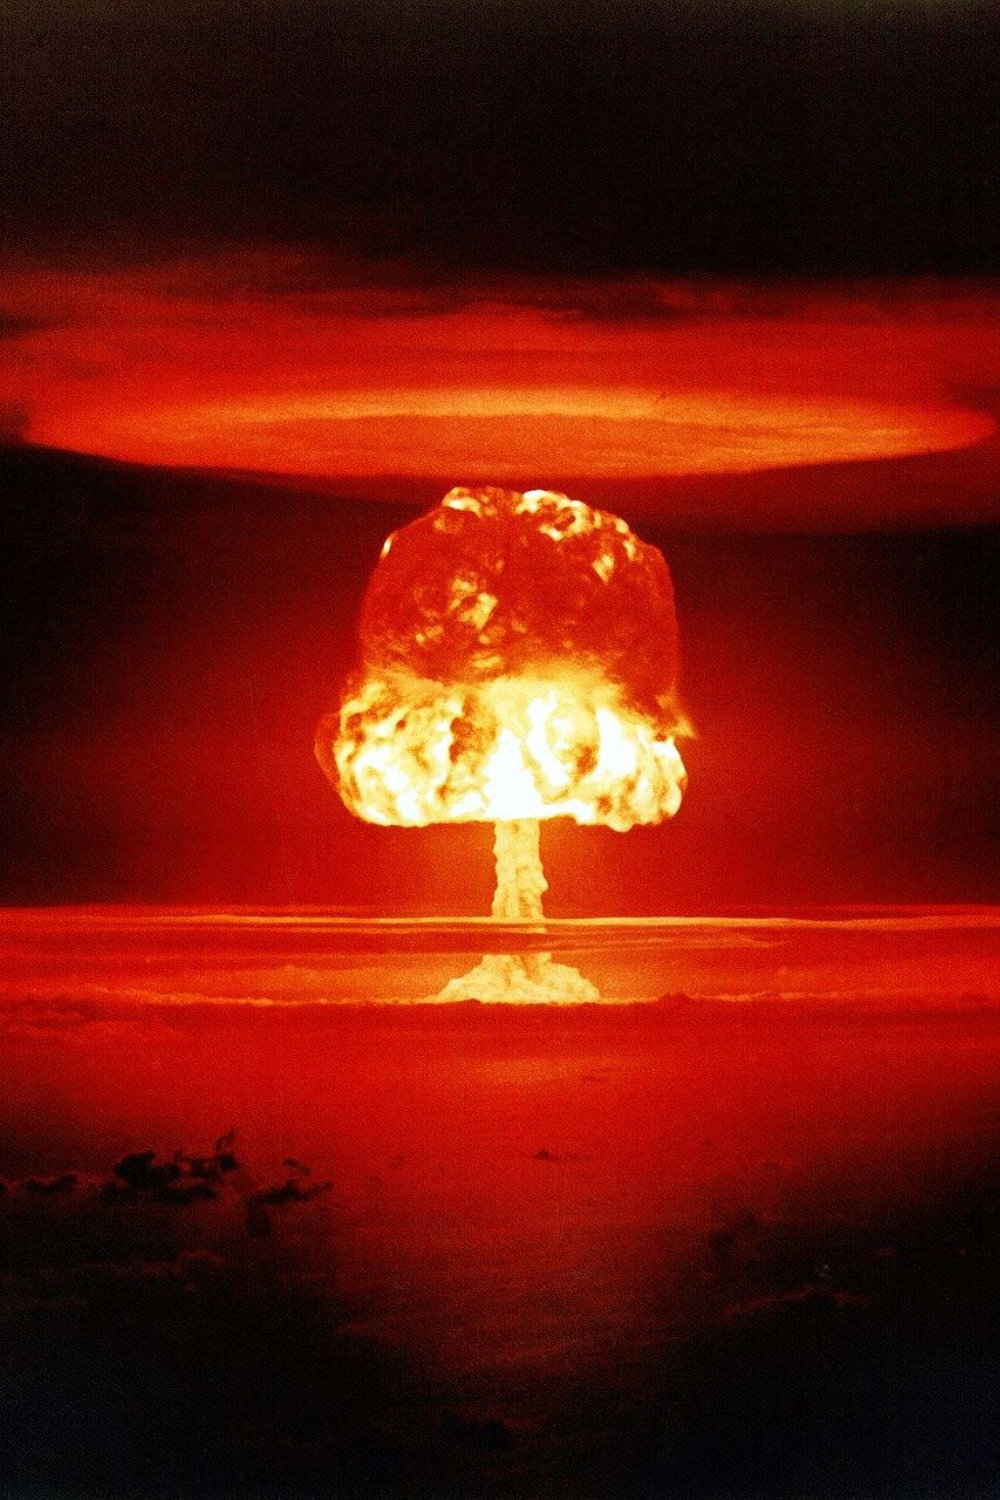 Nuclear War to Trigger an Ice Age, End of Life